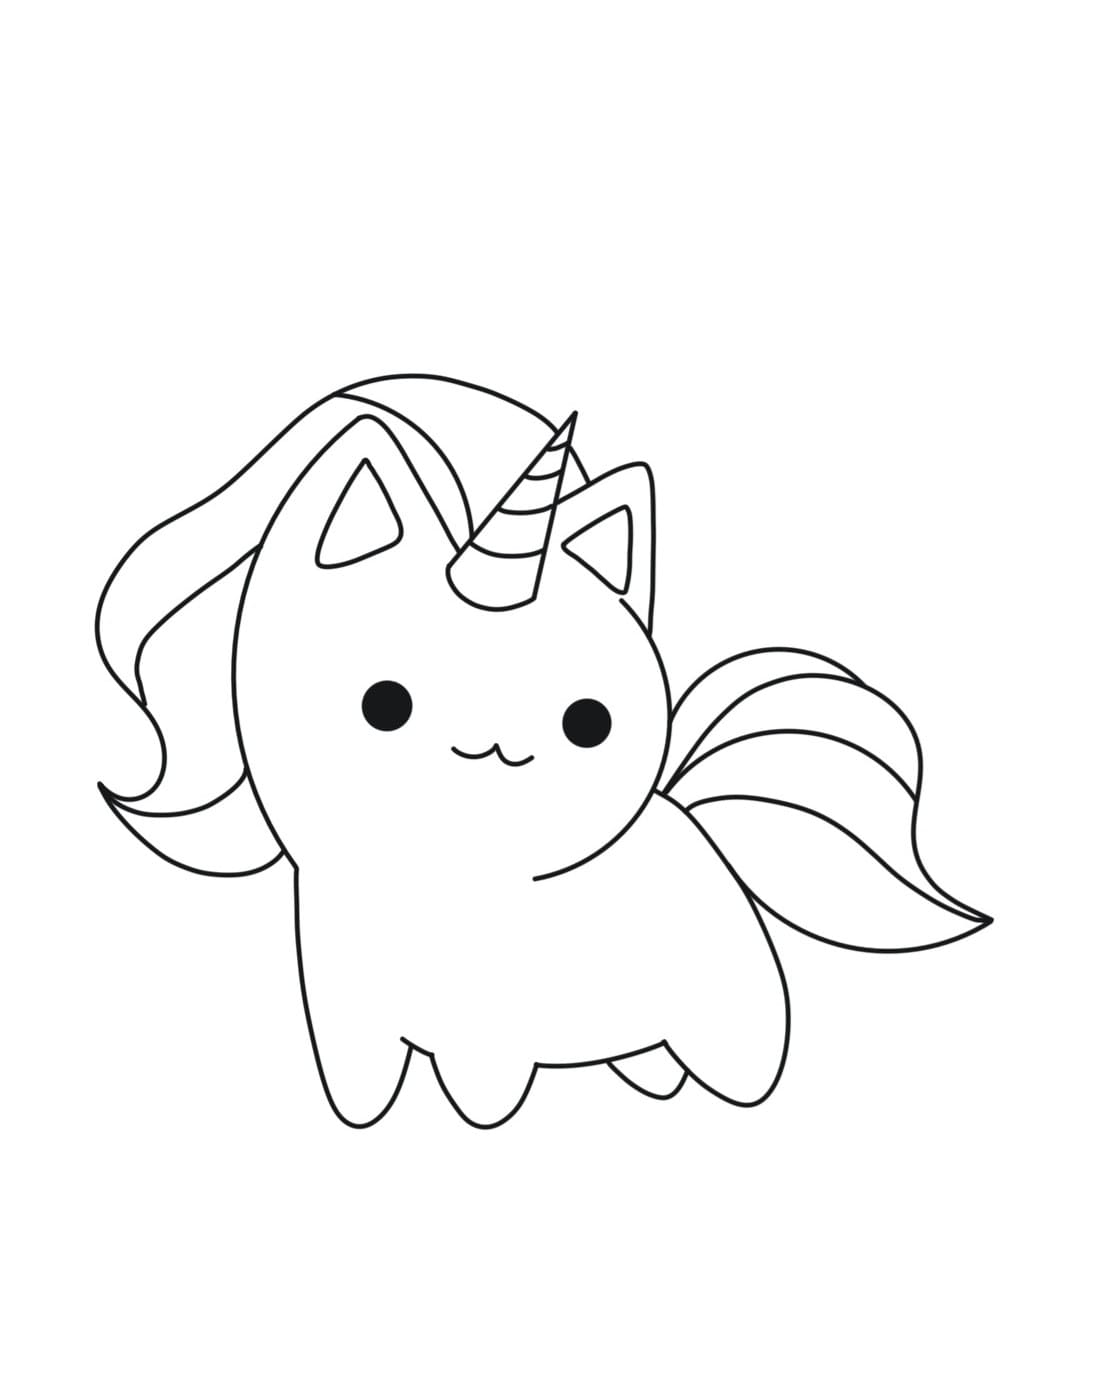 Coloring page Unicorn Cat for girls 5 years old